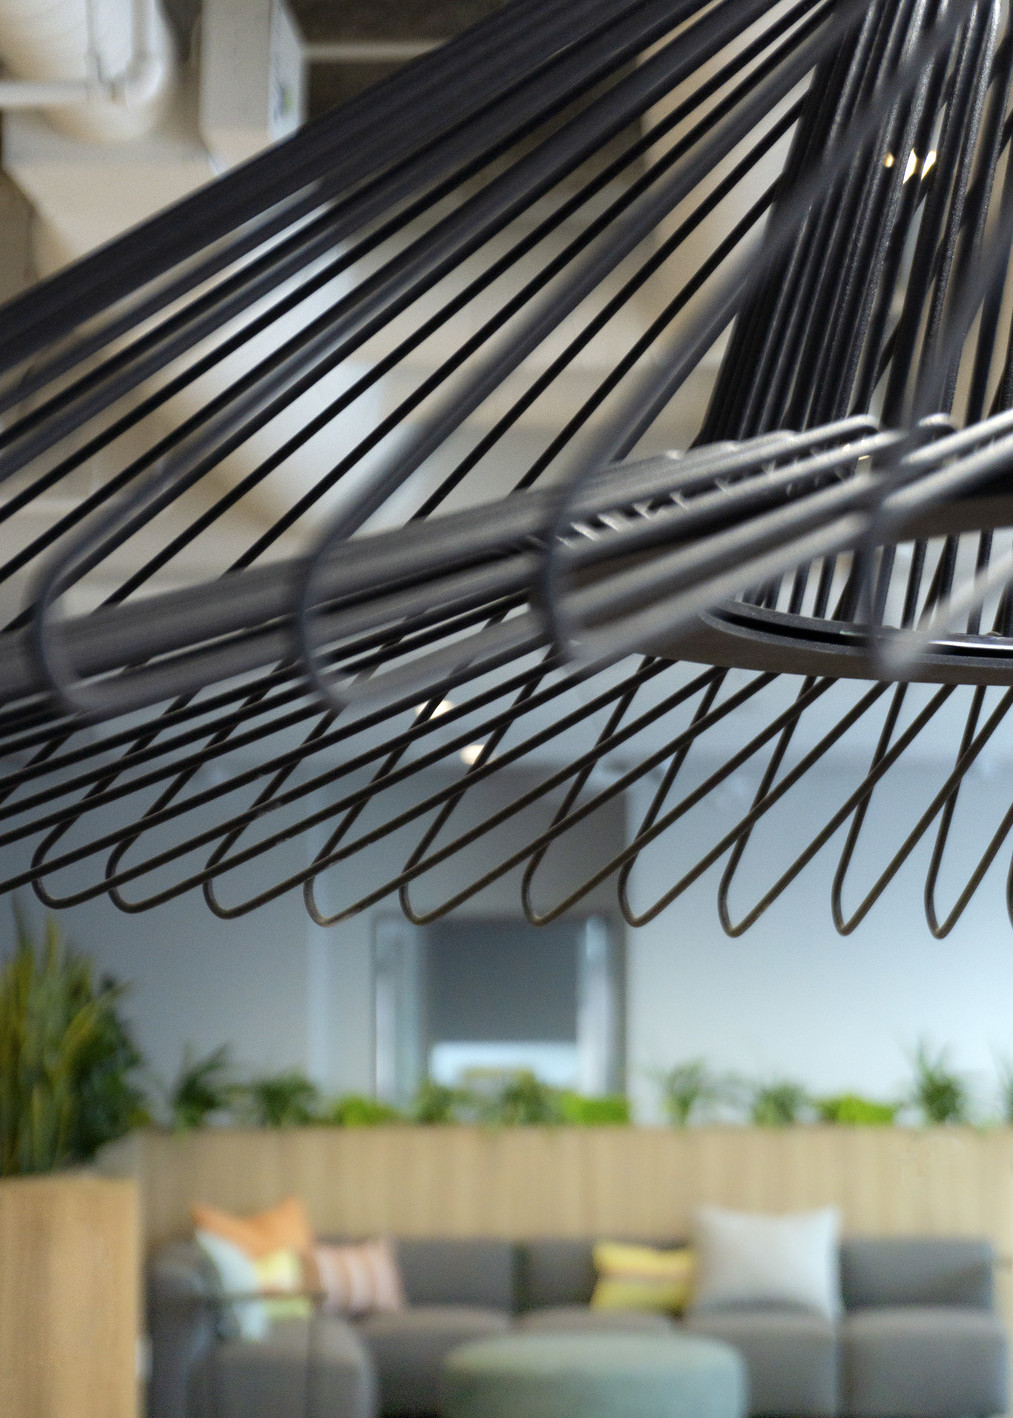 Closeup of black wire pendant lamp shade. In background, couch with wood half wall with plants behind